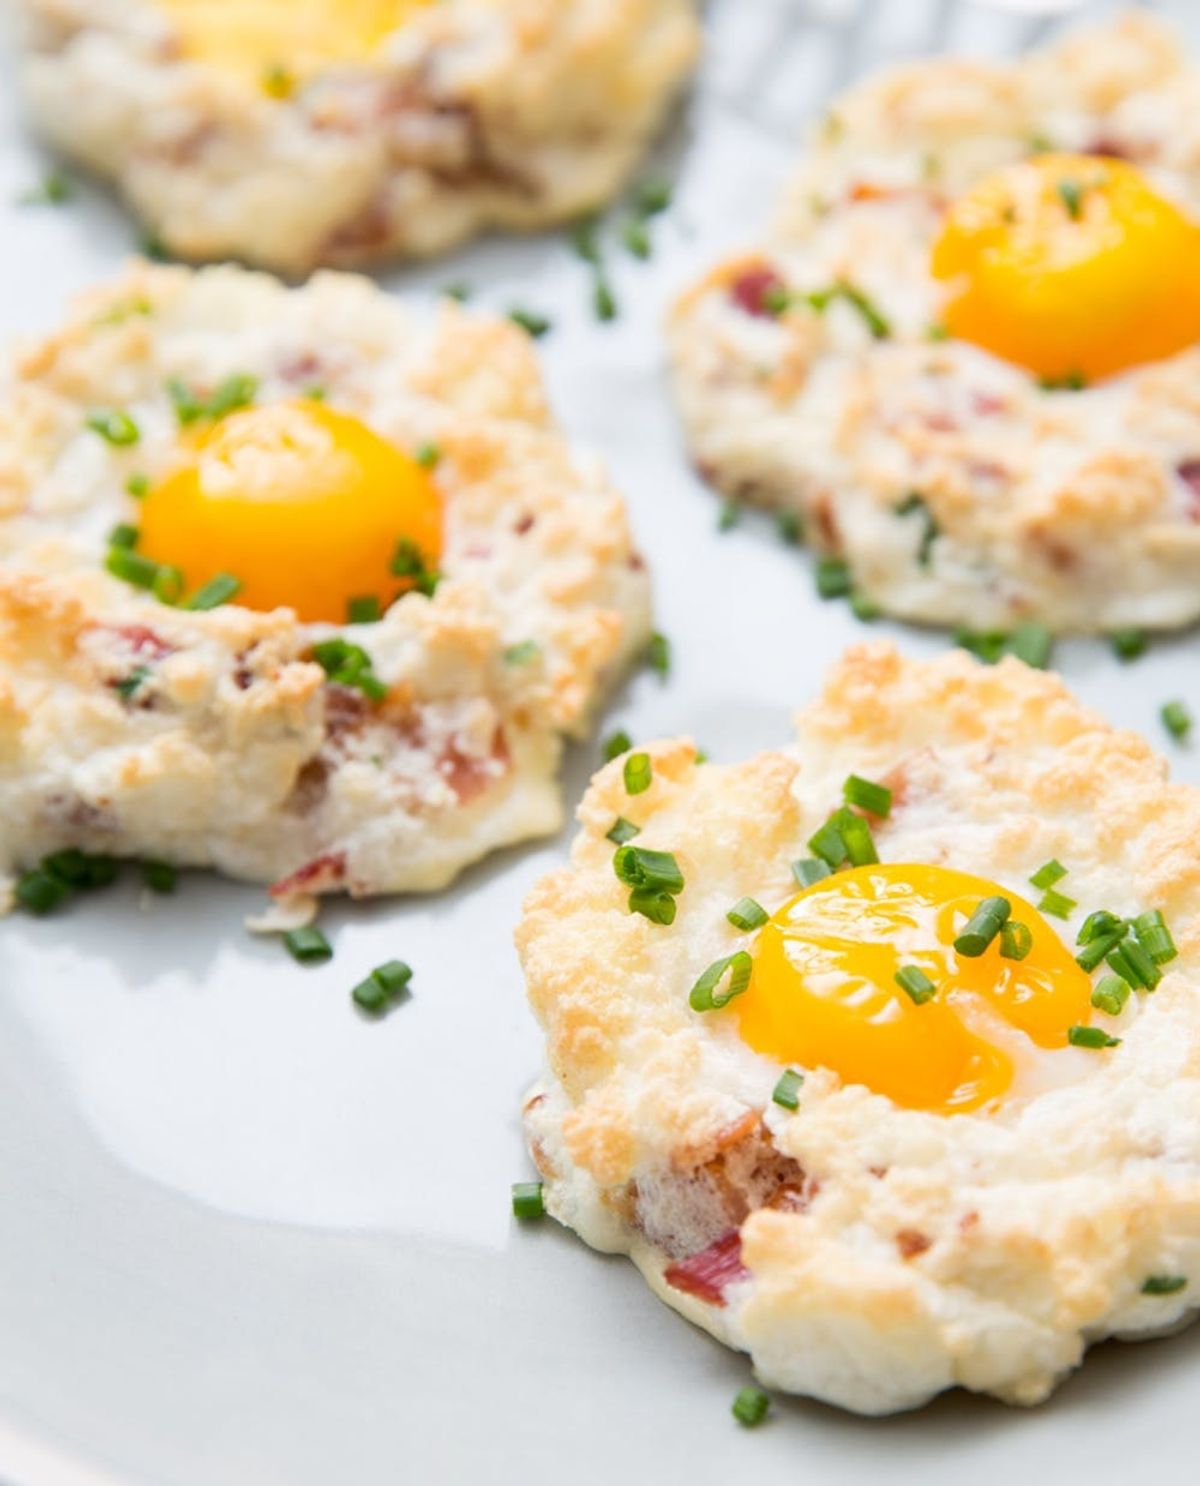 20 Egg Dishes to Cook Up for Easter Brunch